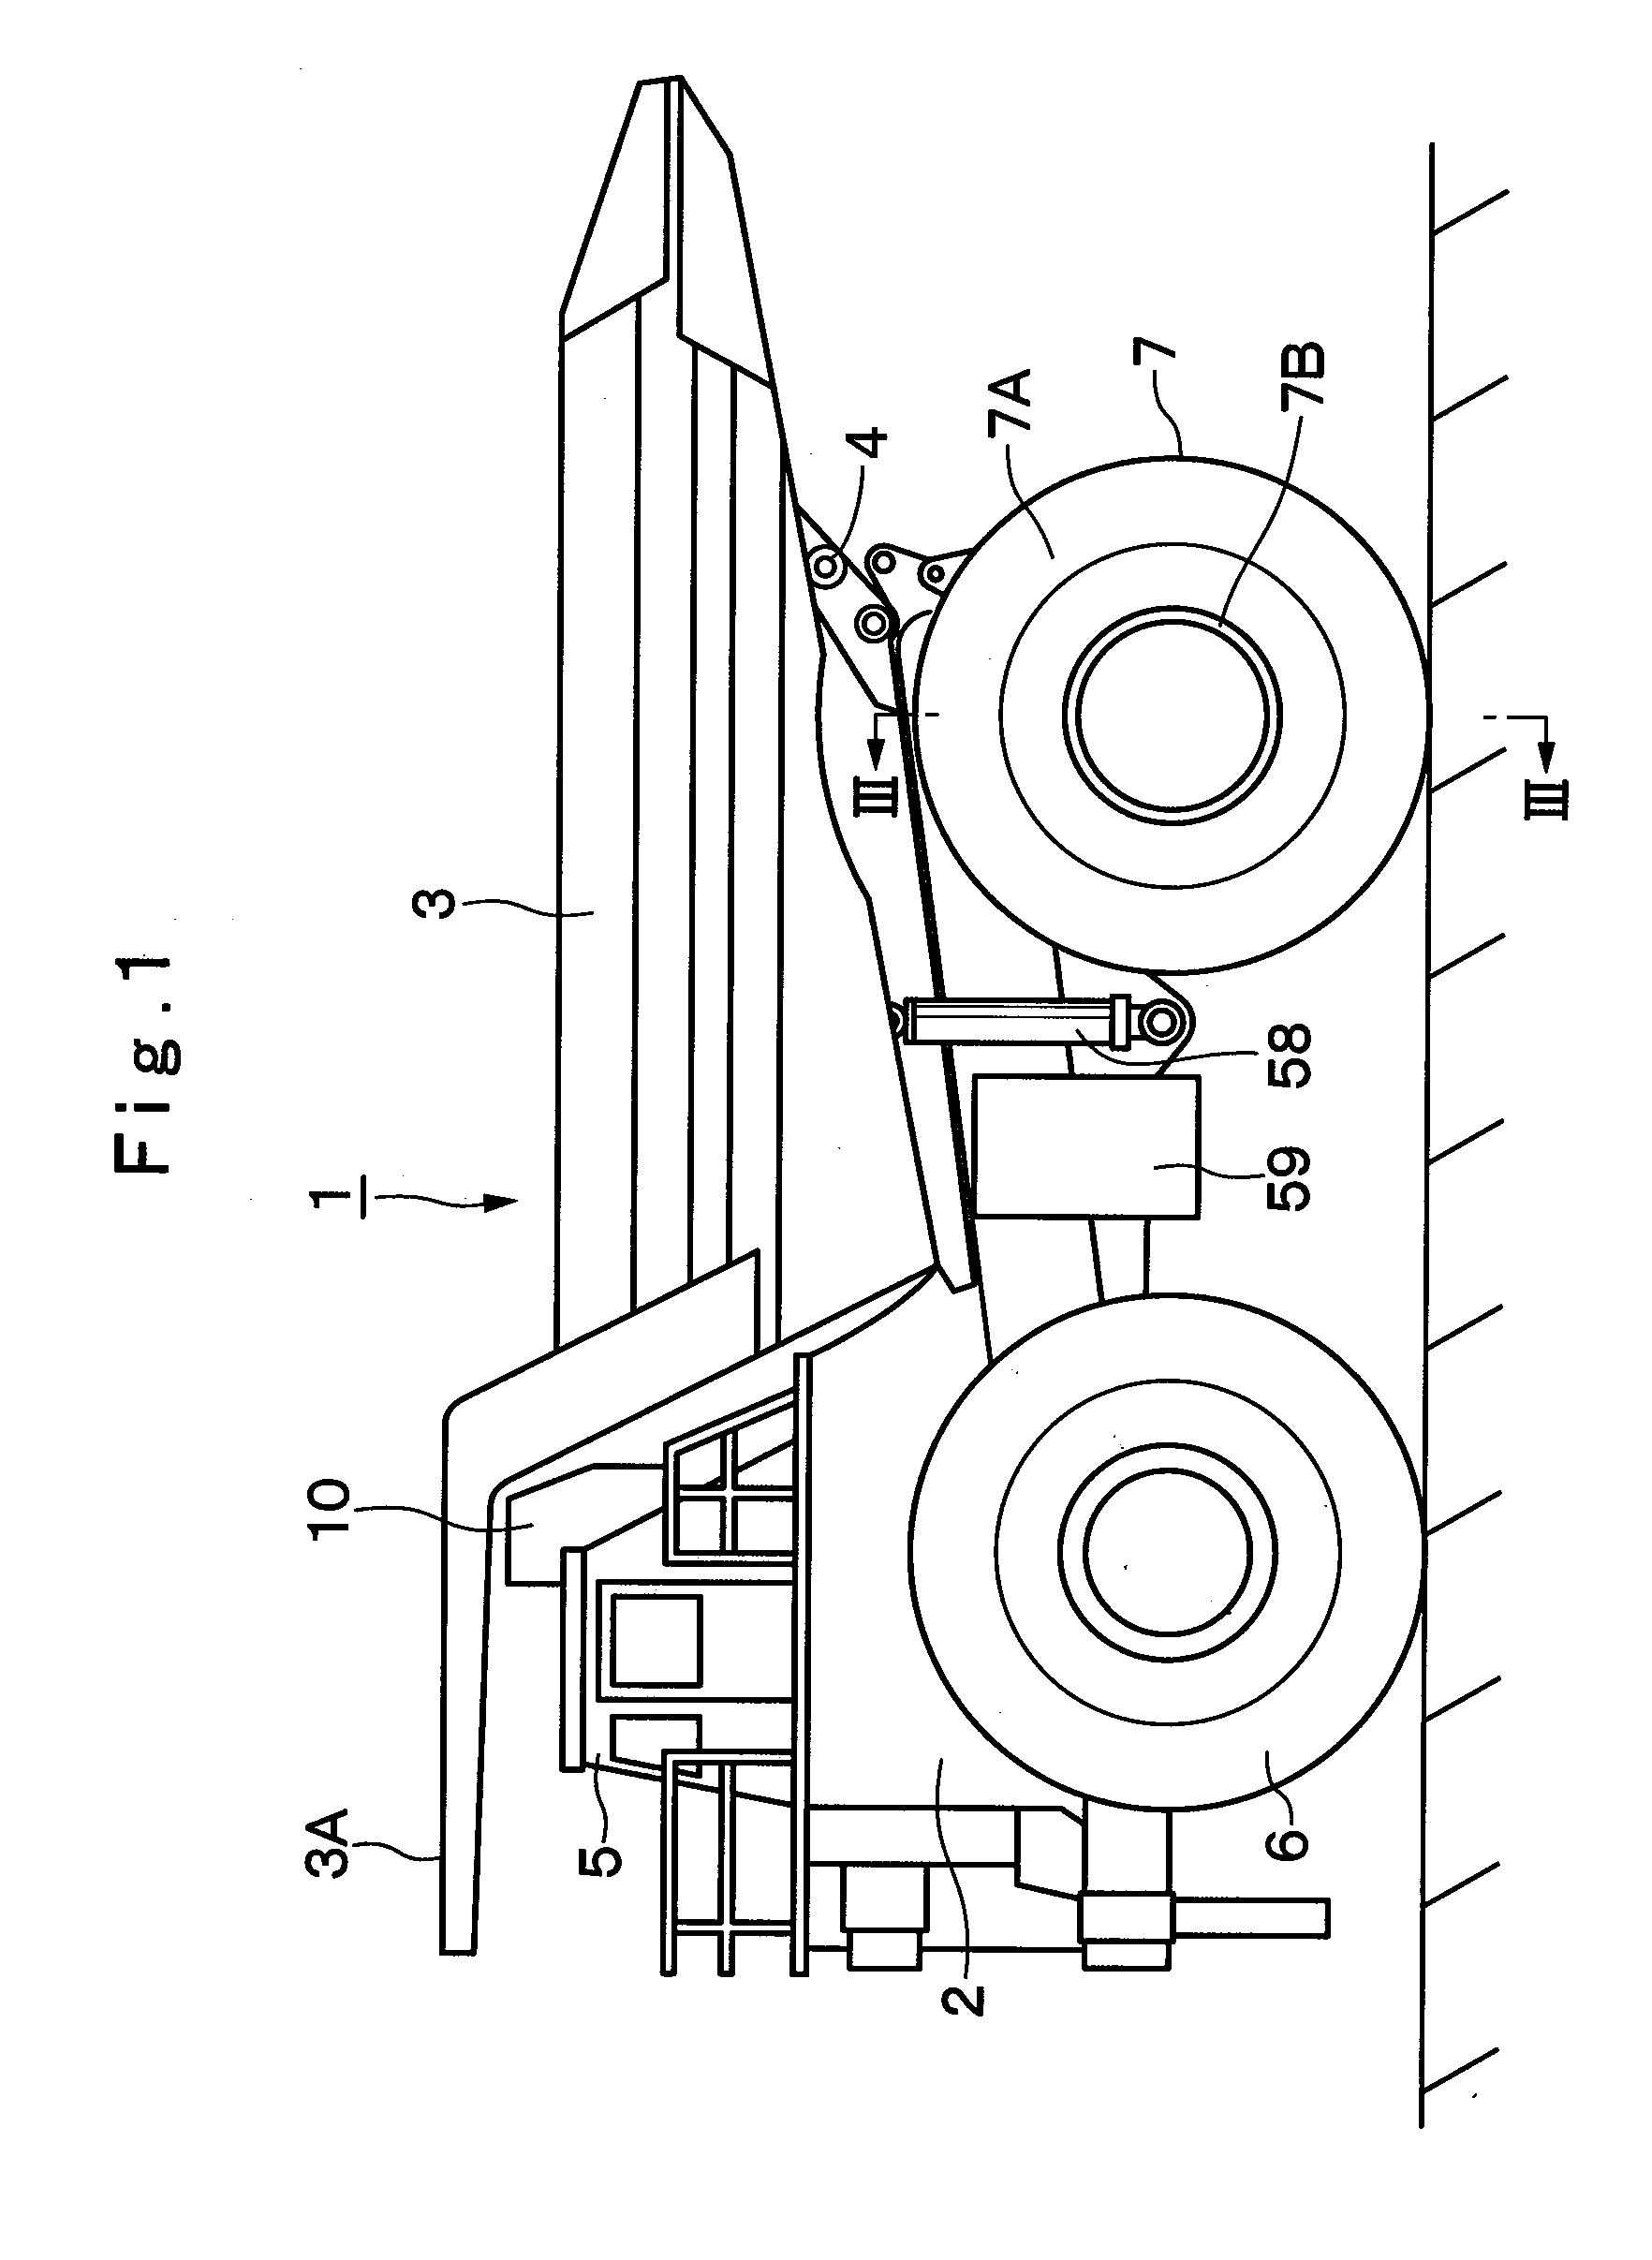 Travel drive apparatus for a working vehicle